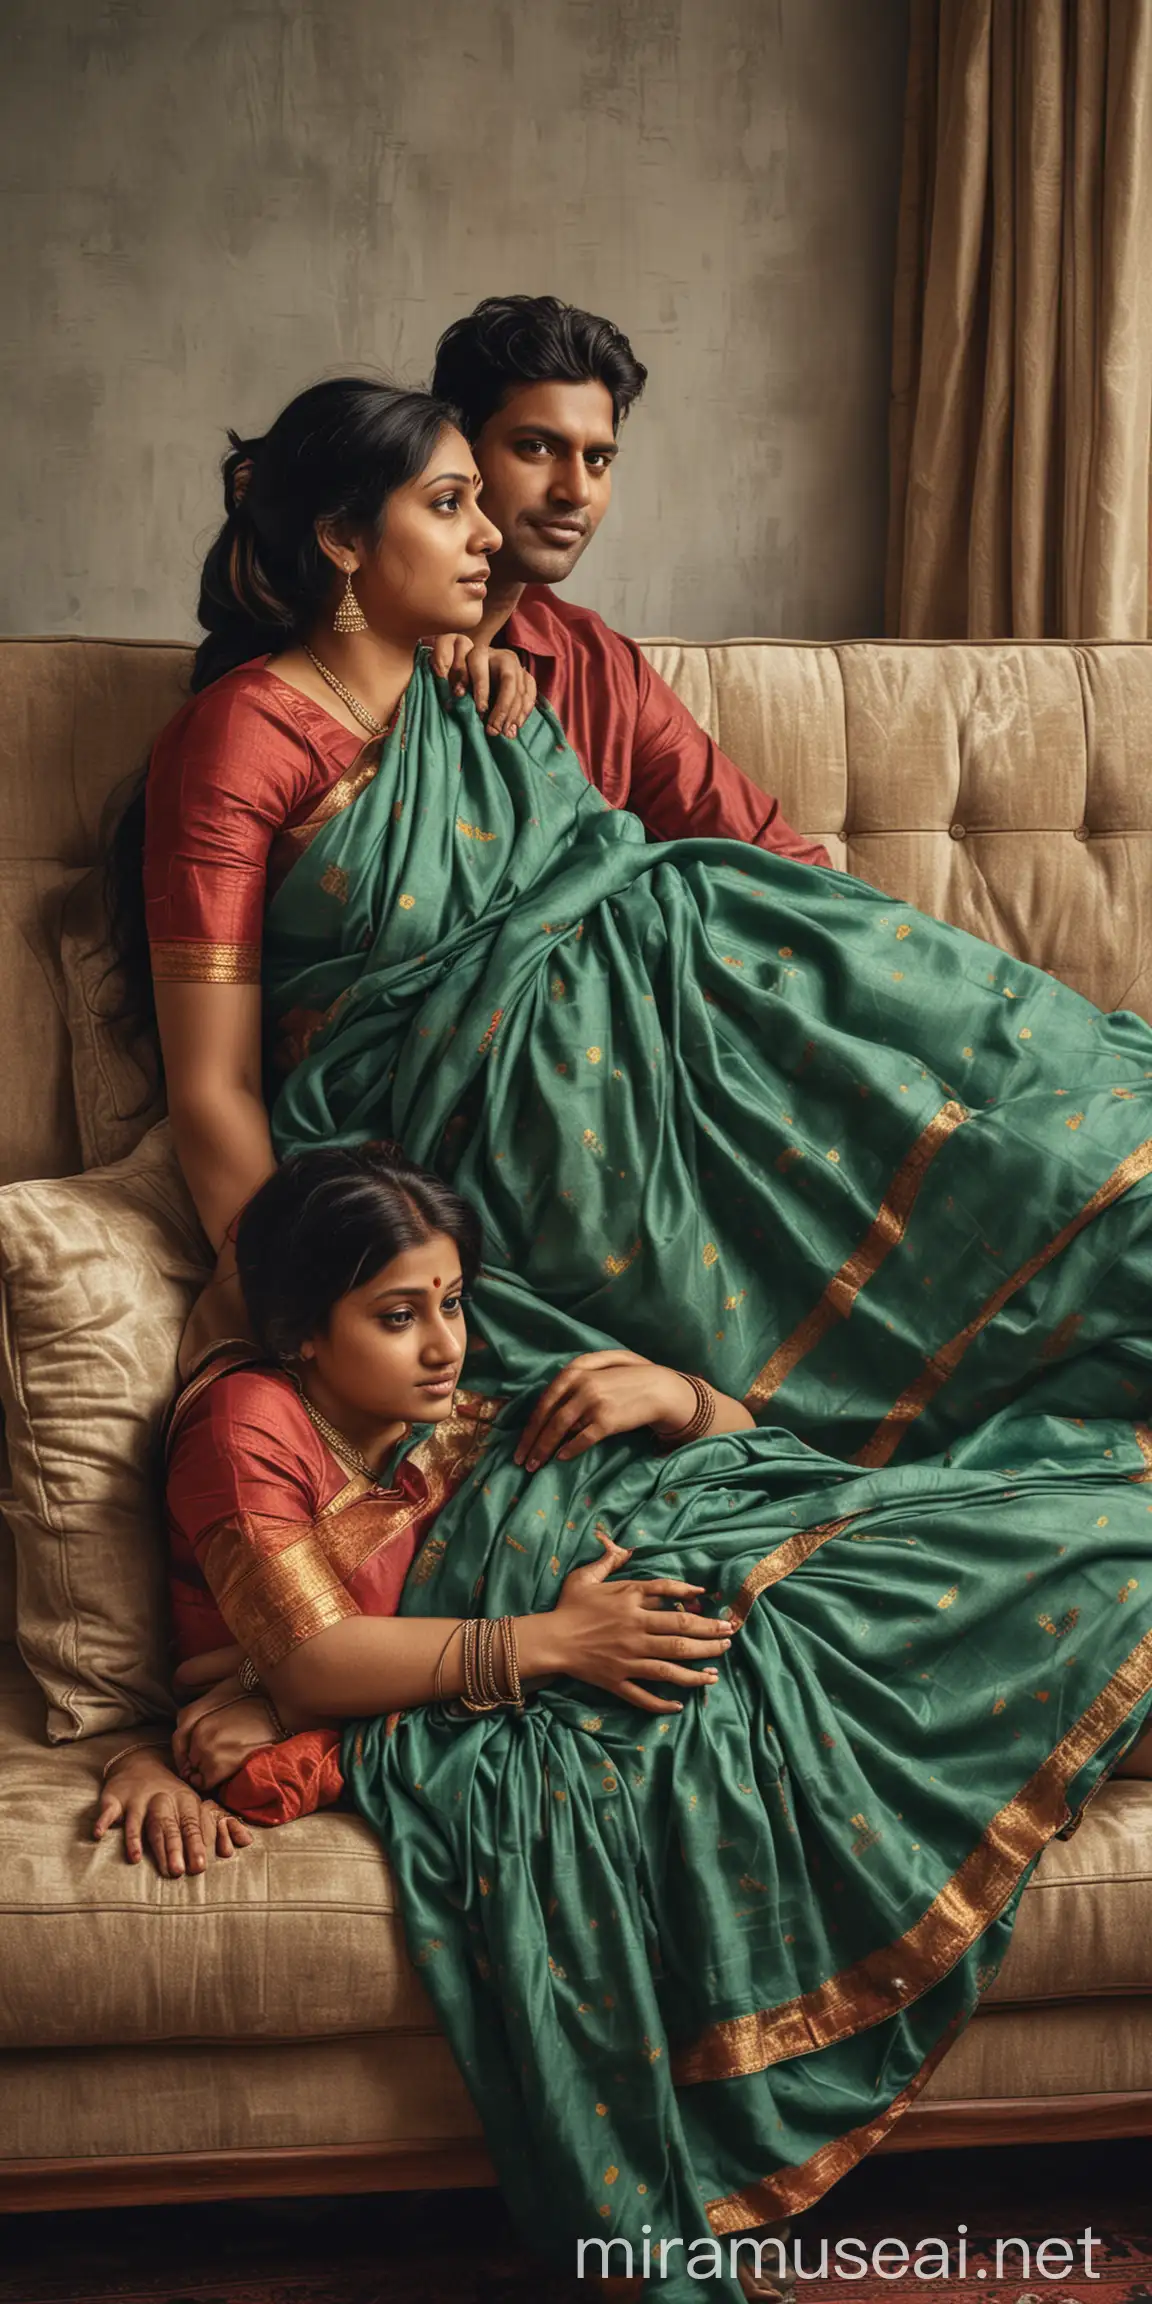 Indian Woman in Saree Sitting with Husband in Modest Home Setting